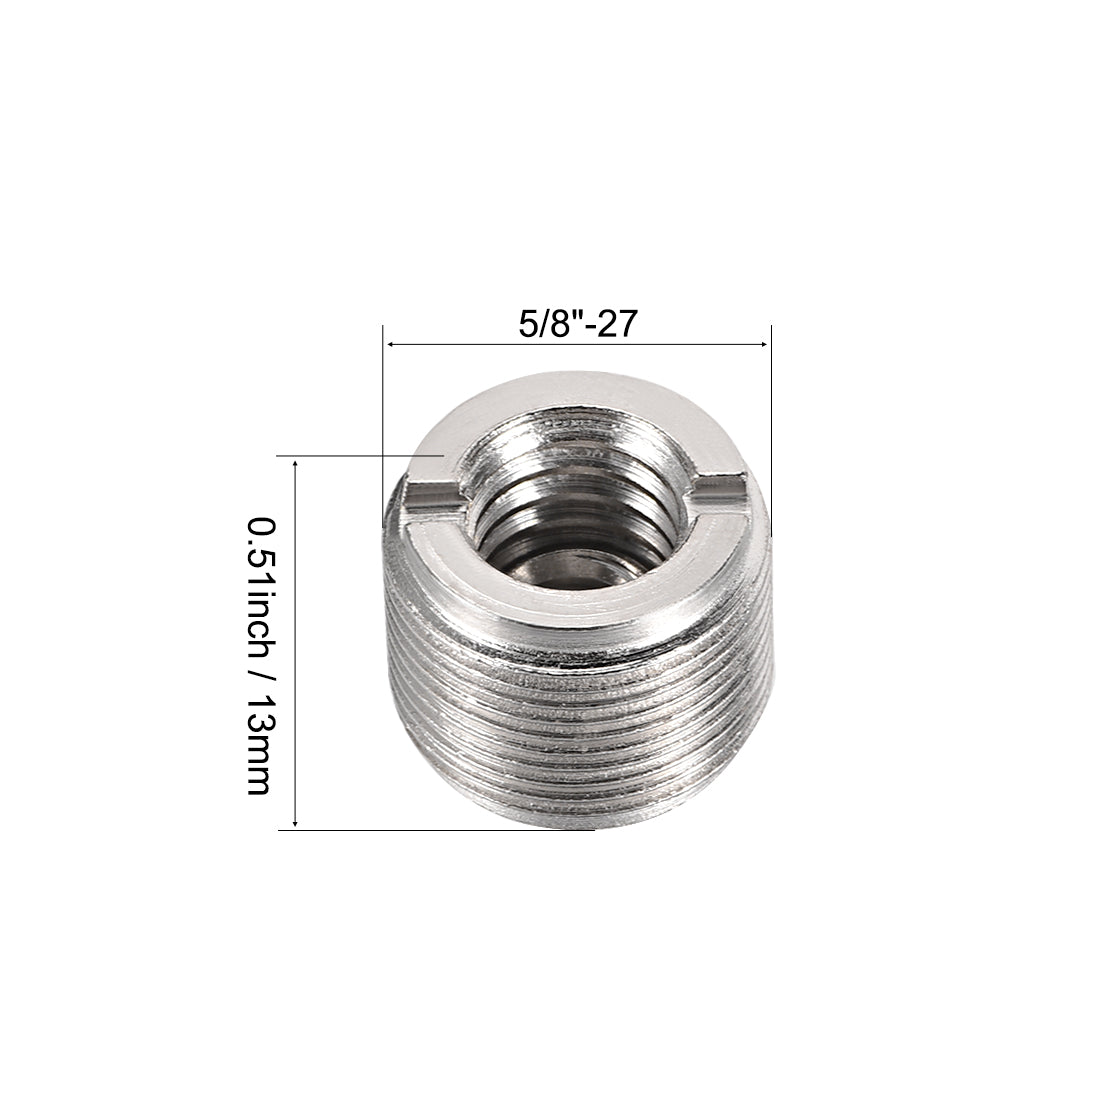 uxcell Uxcell 1/4” Female To 5/8" Male Threaded Screw Adapter For Microphone Tripod Stand 1pcs